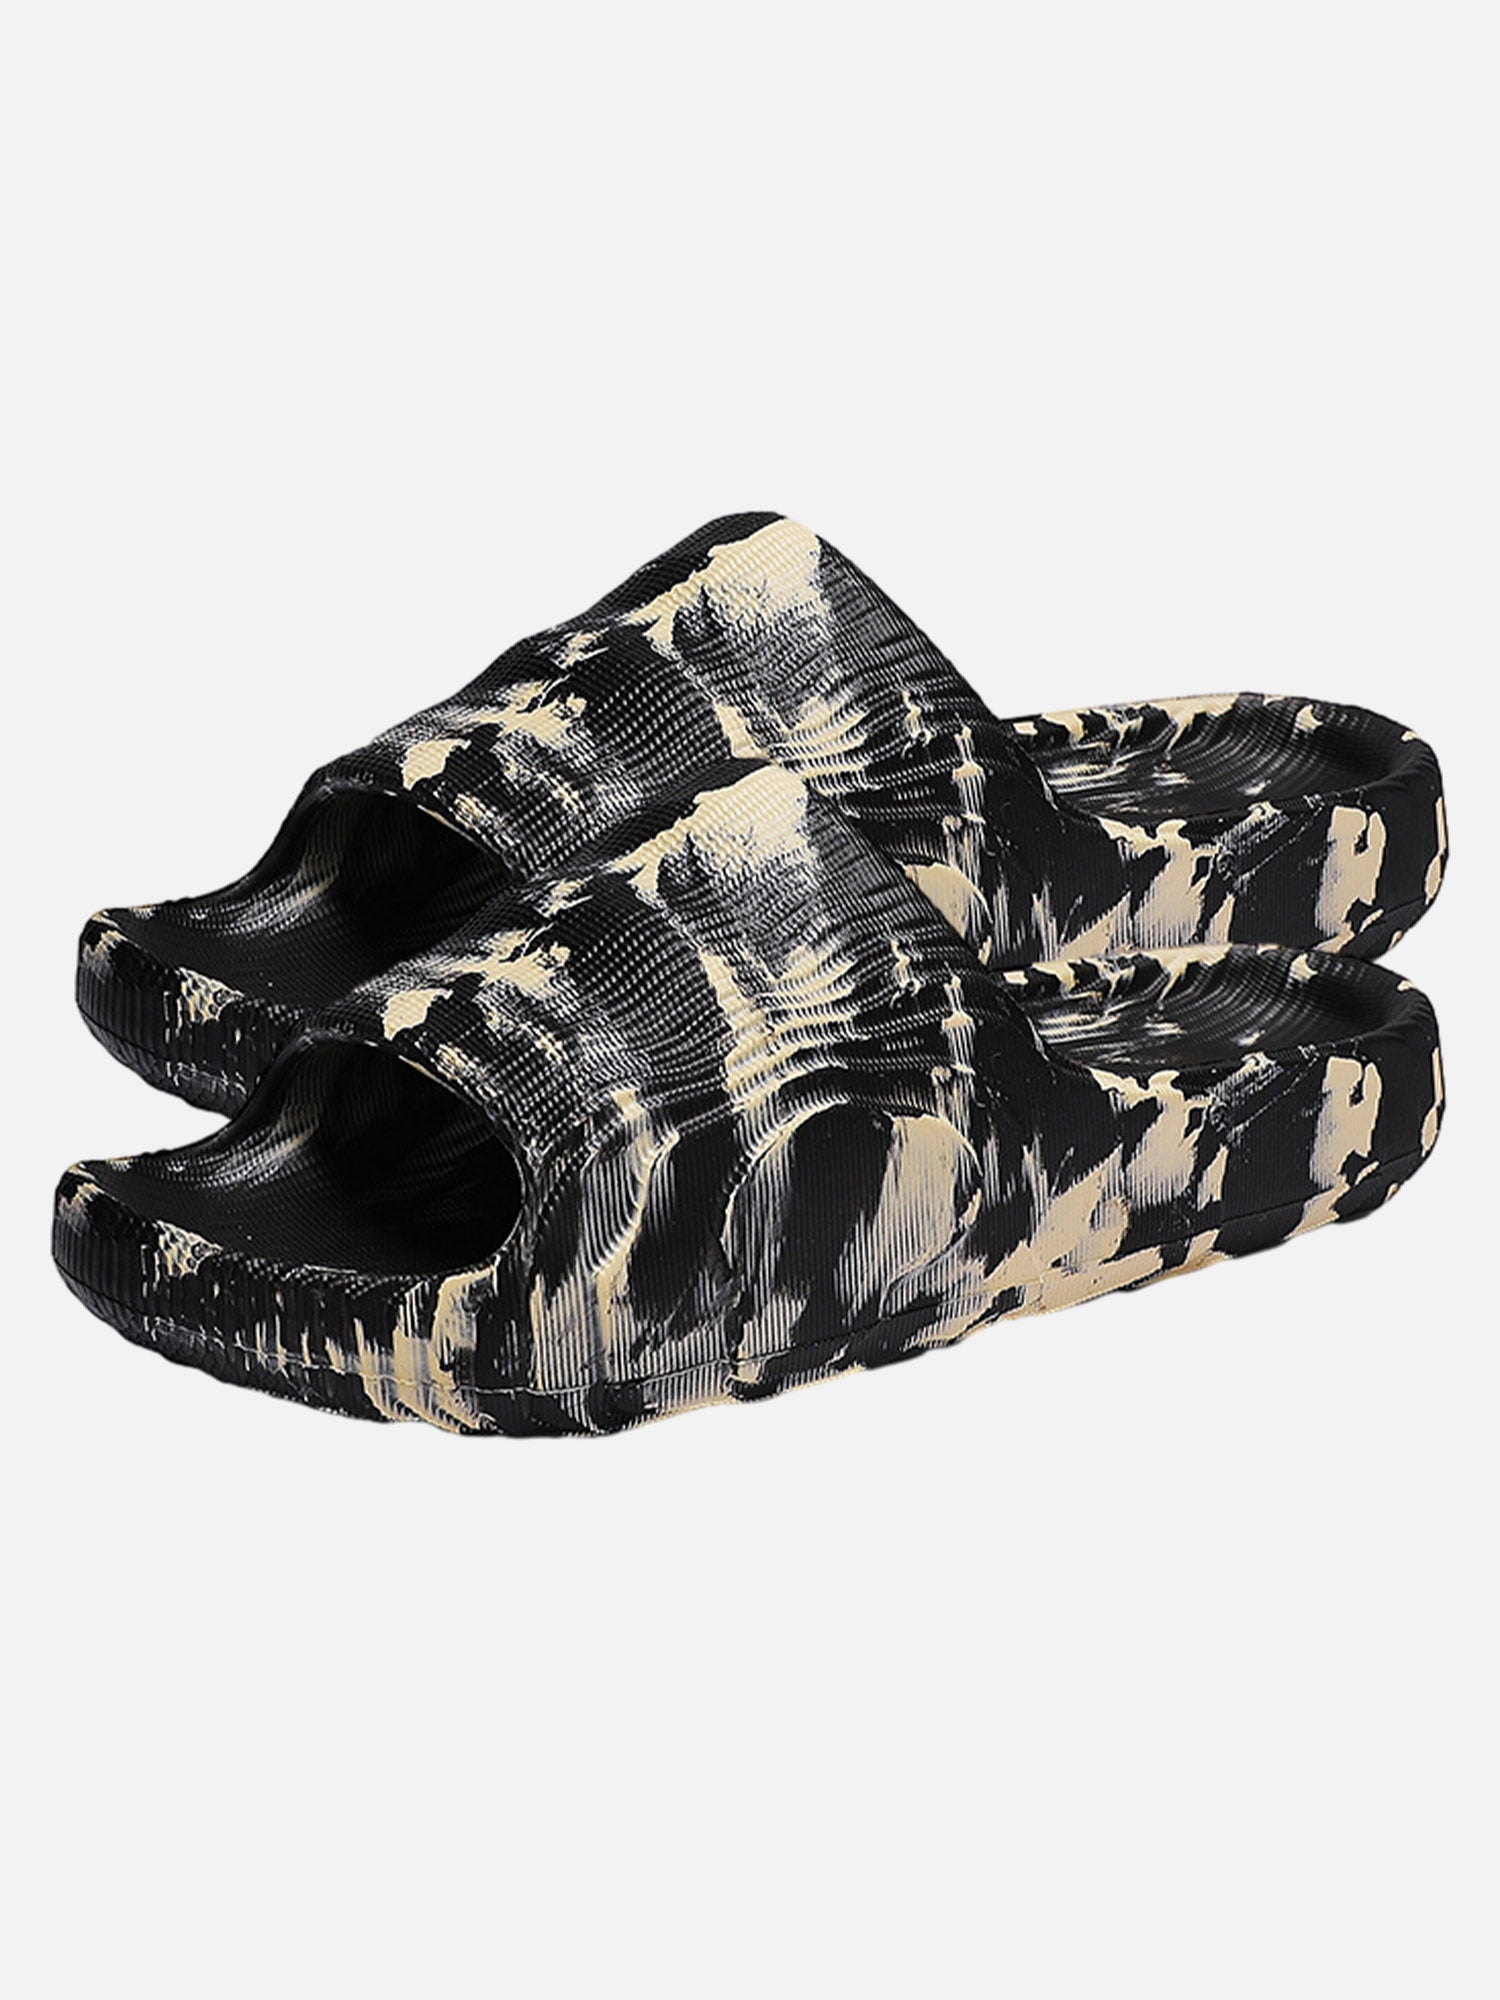 Fashionable Camouflage Graffiti Outdoor Slippers